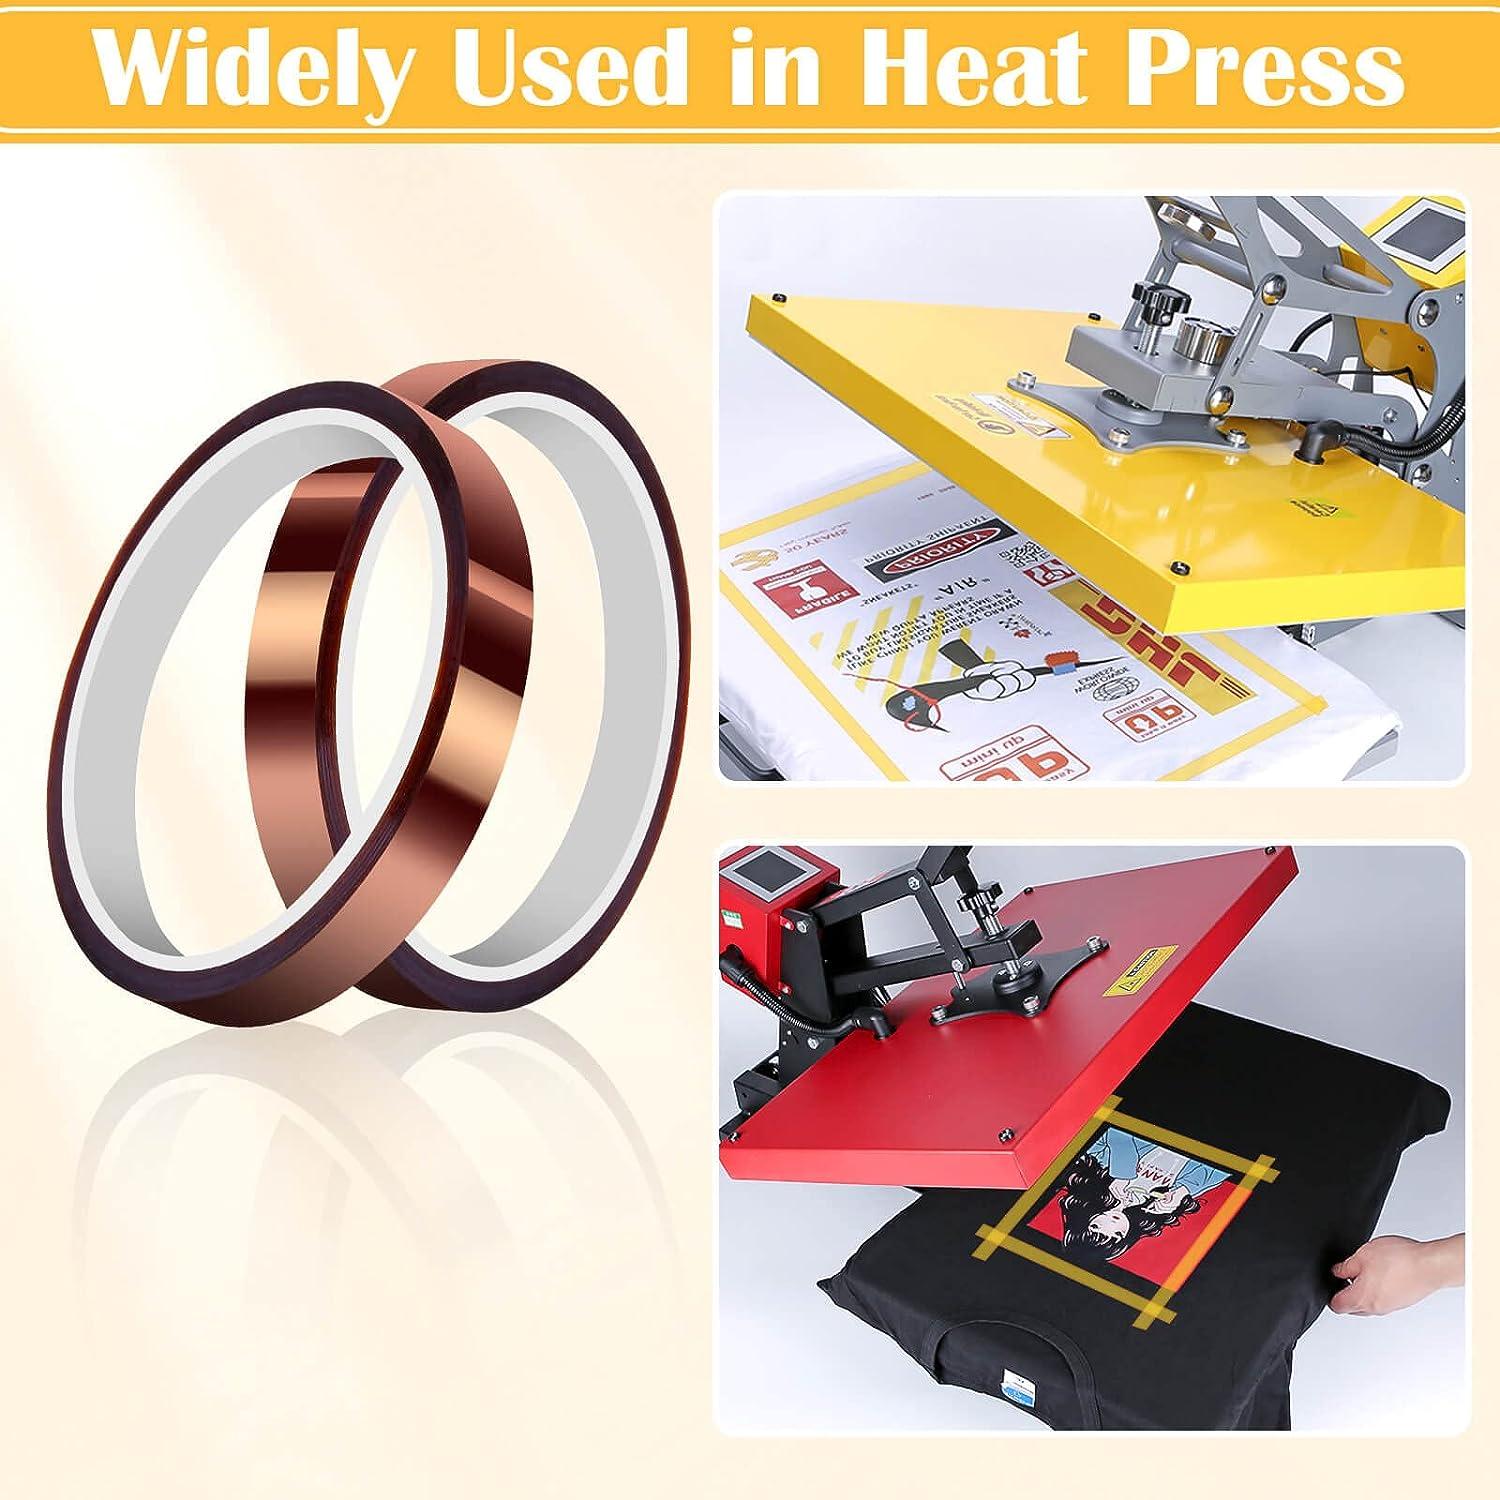 Heat Resistant Transfer Tape For Sublimation Leaves No-Mark Or